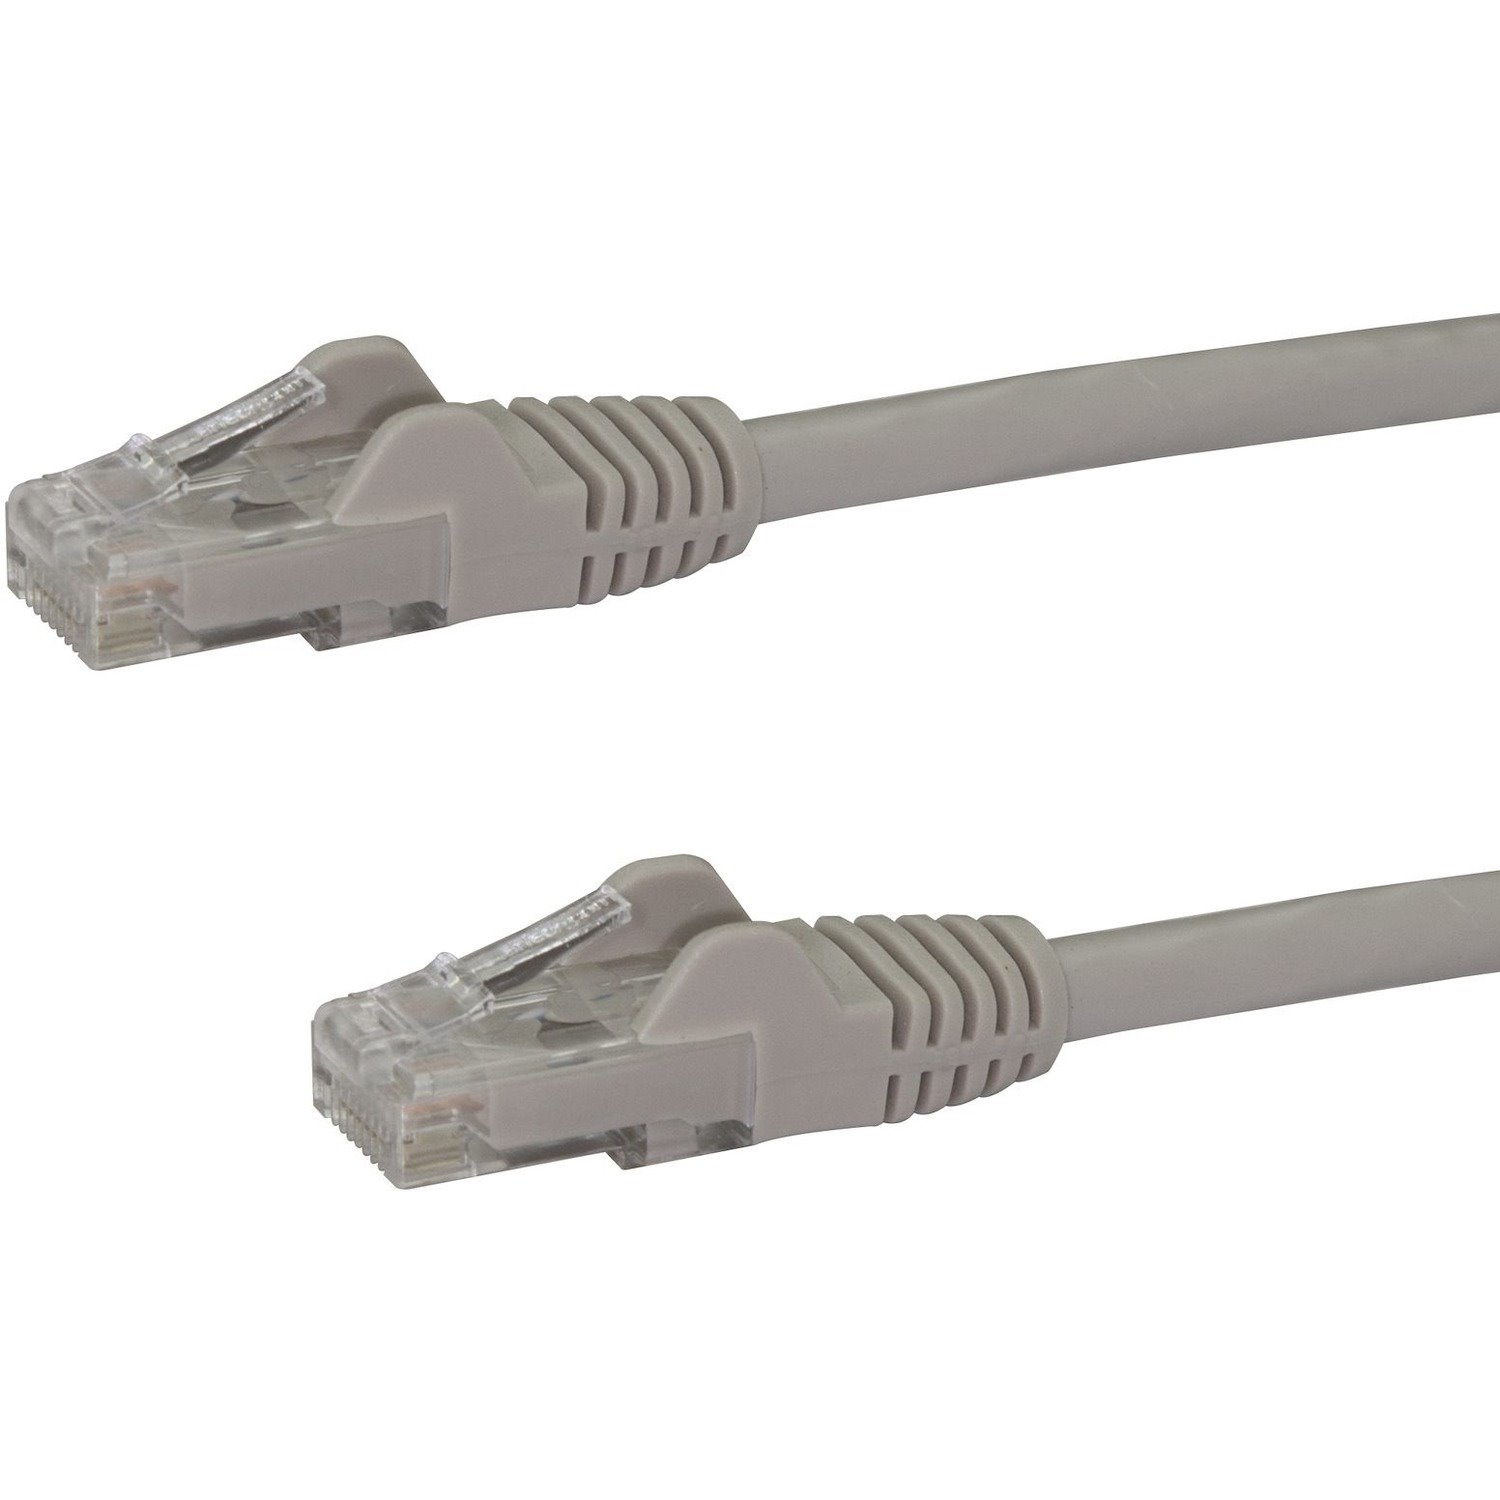 StarTech.com 7 m Category 6 Network Cable for Network Device - 1